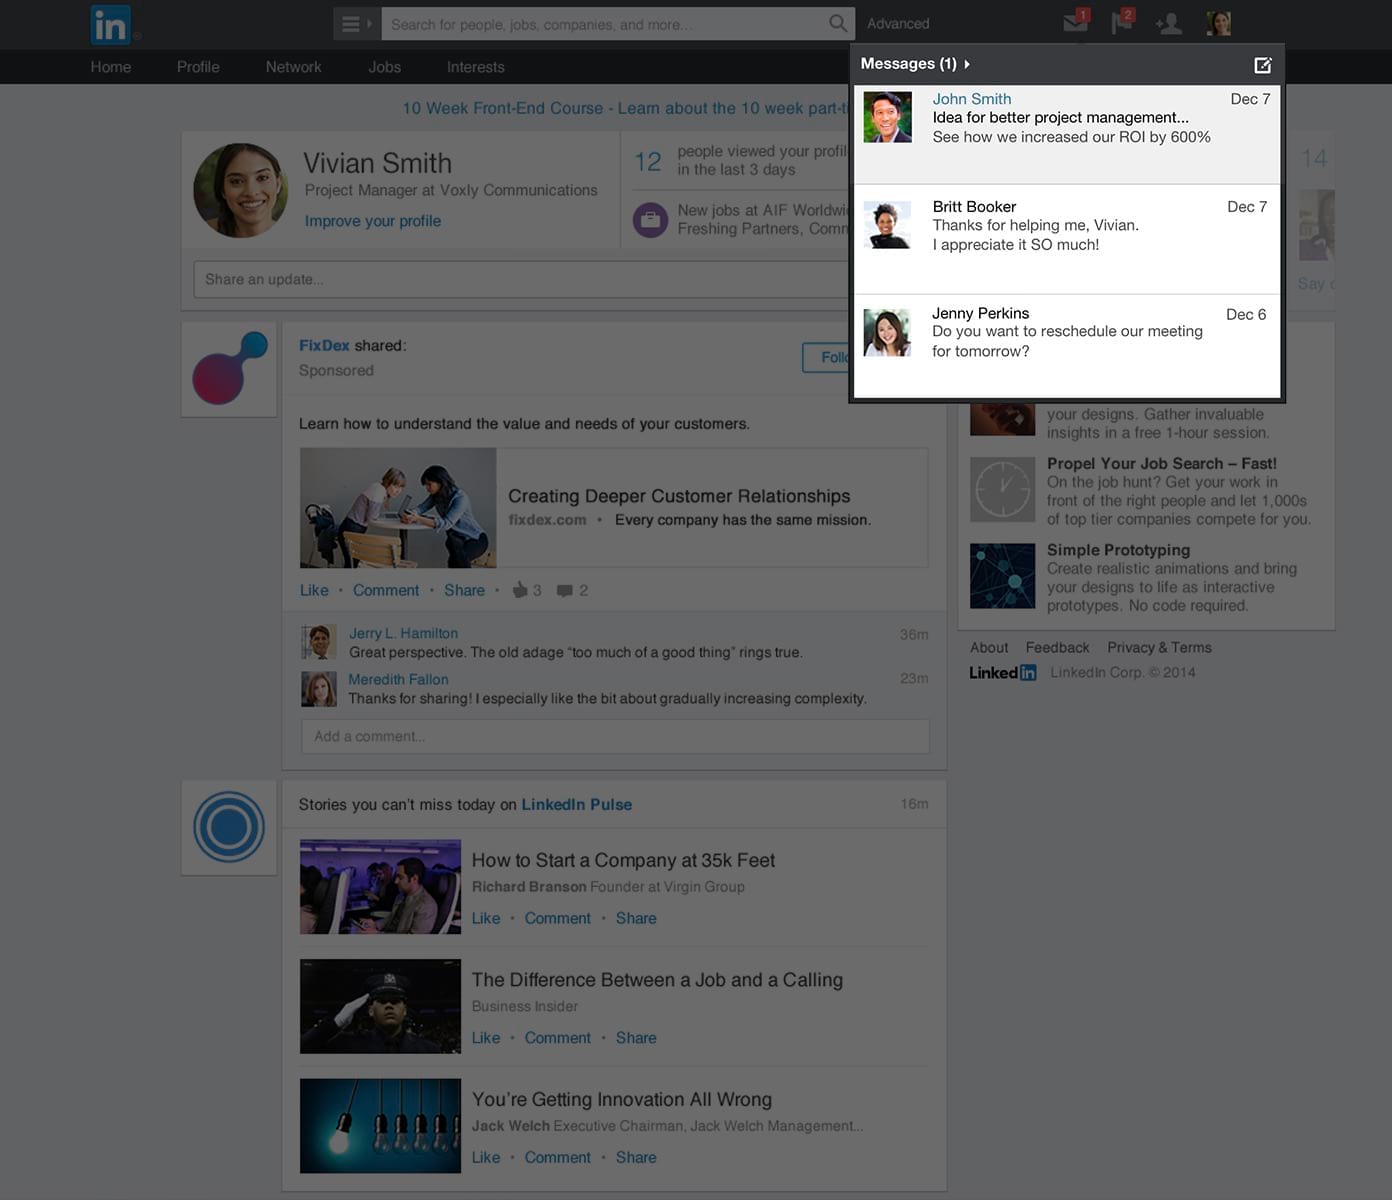  You can boost event registrations sending personalized invites to your audience through LinkedIn messenger